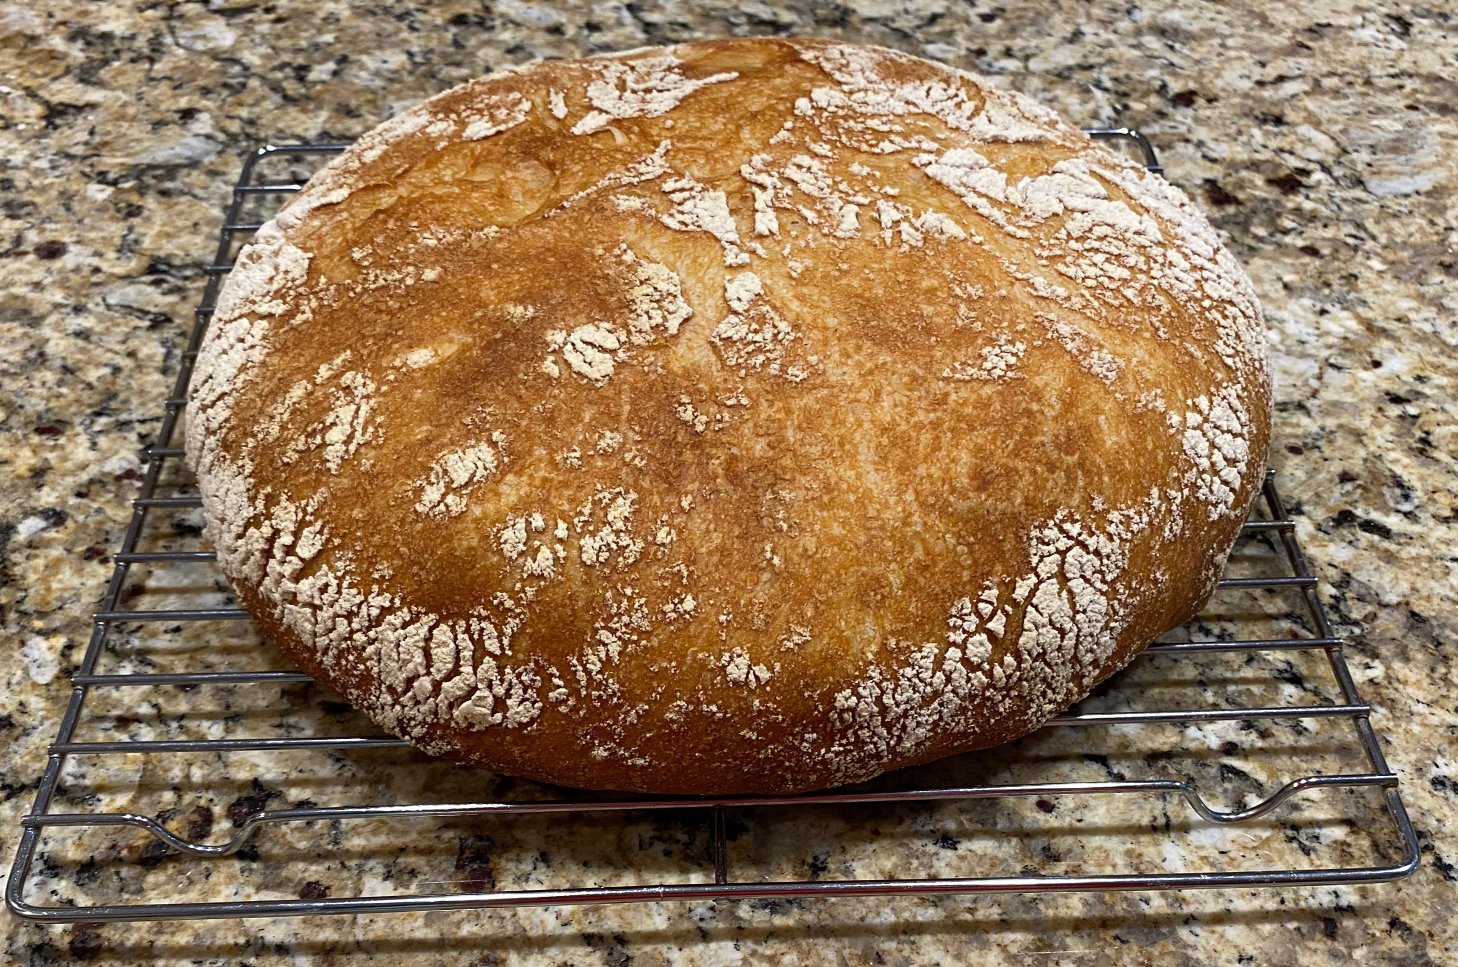 Finished bread from side